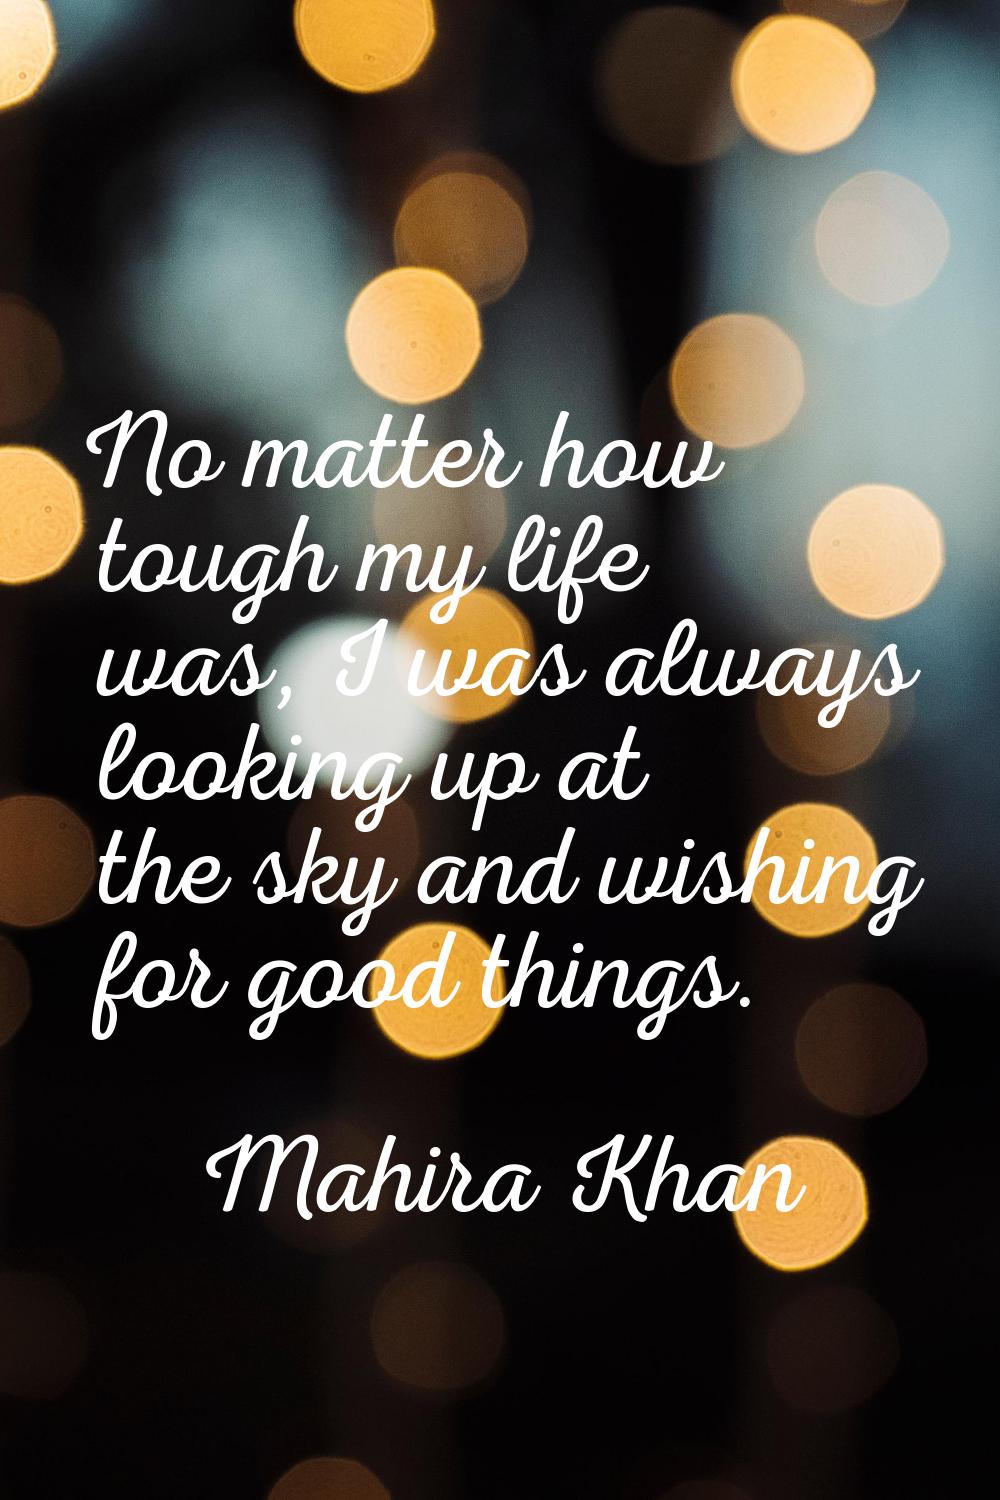 No matter how tough my life was, I was always looking up at the sky and wishing for good things.